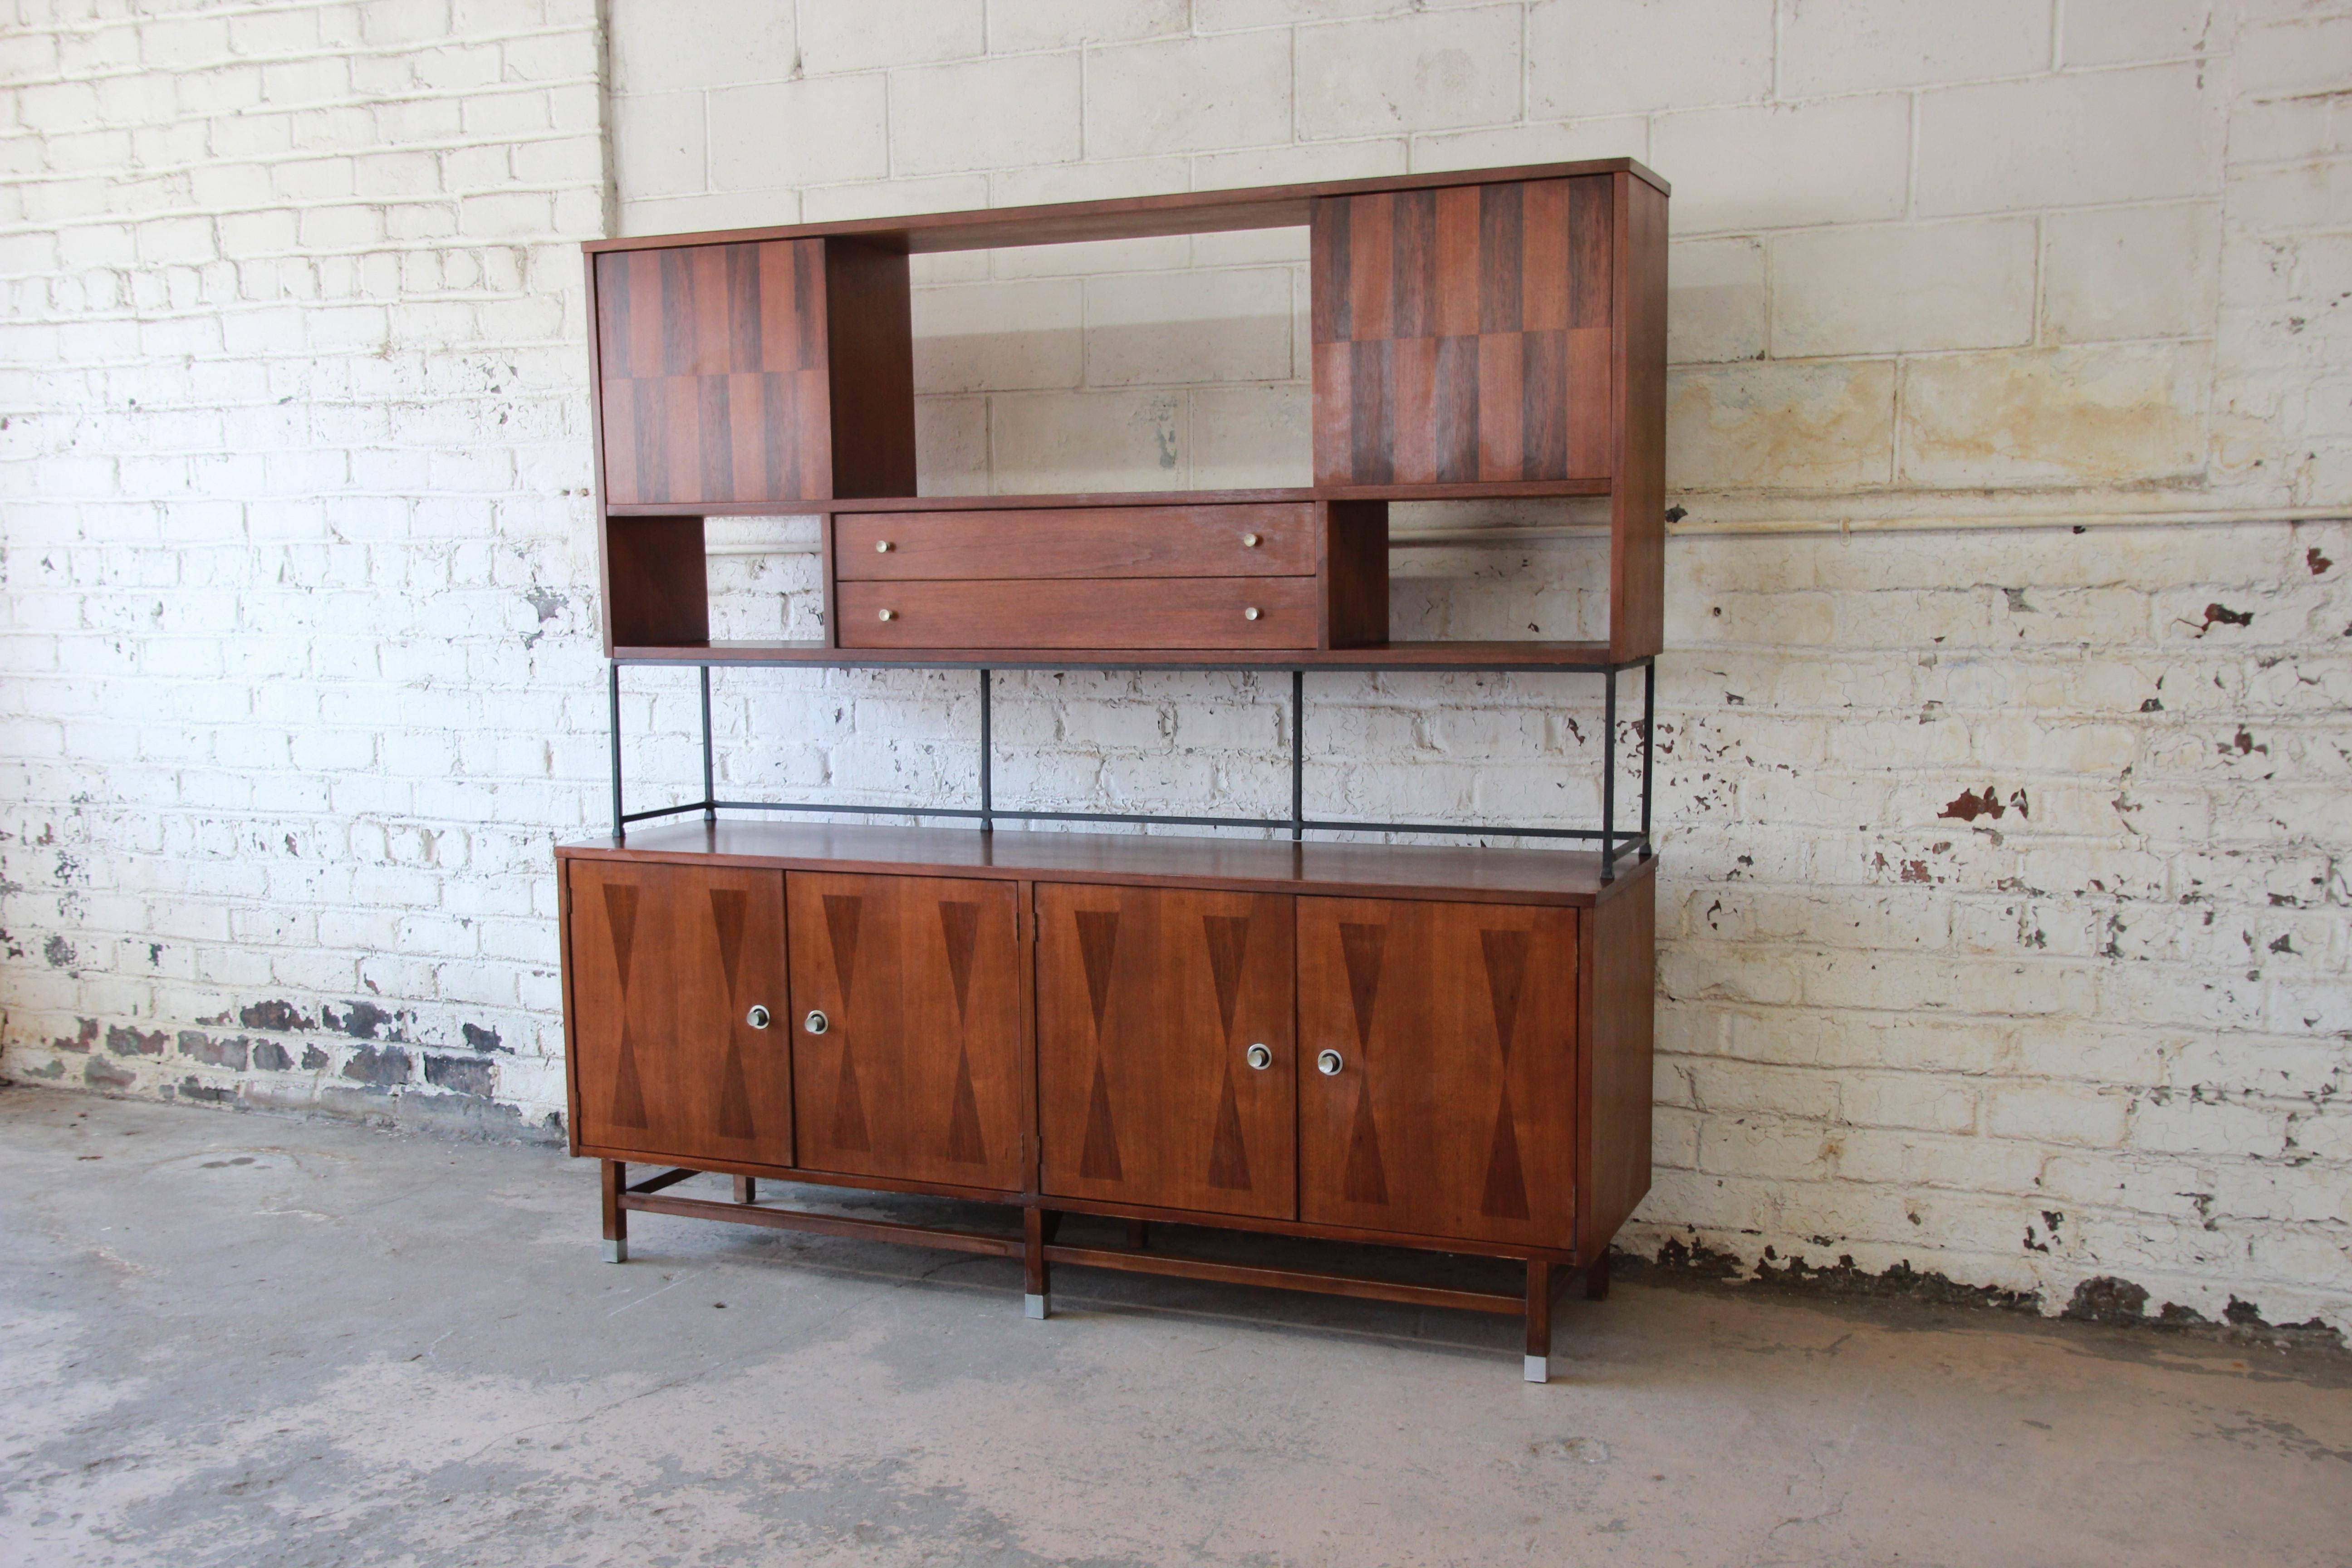 An exceptional Mid-Century Modern walnut and rosewood wall unit or sideboard by Stanley Furniture. The wall unit features gorgeous walnut wood grain with inlaid rosewood marquetry. It offers ample room for storage, with five dovetailed drawers and